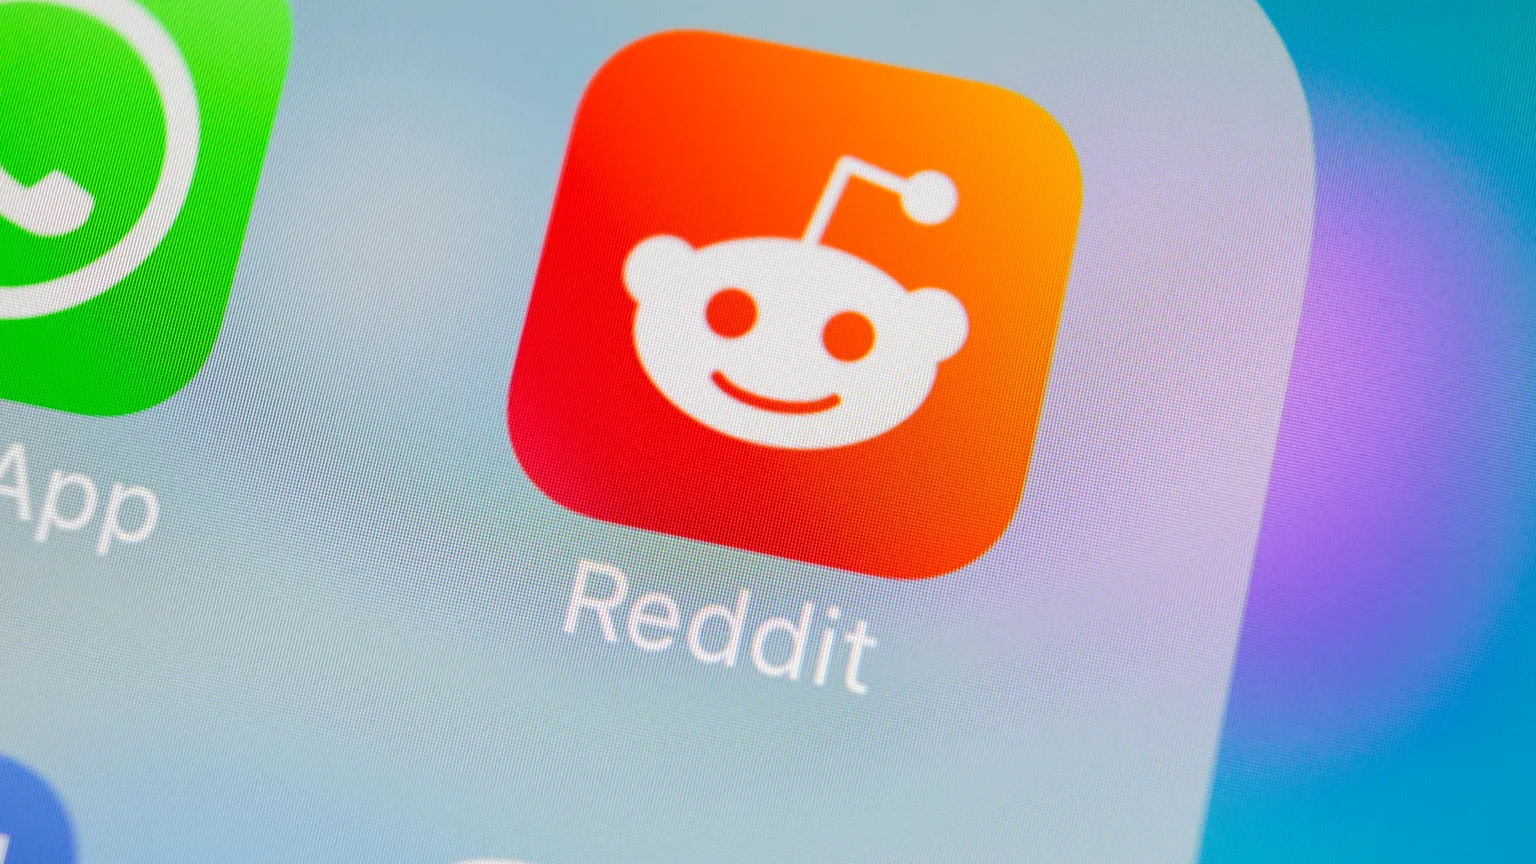 Reddit has made several moves in the crypto space. Image: Shutterstock.